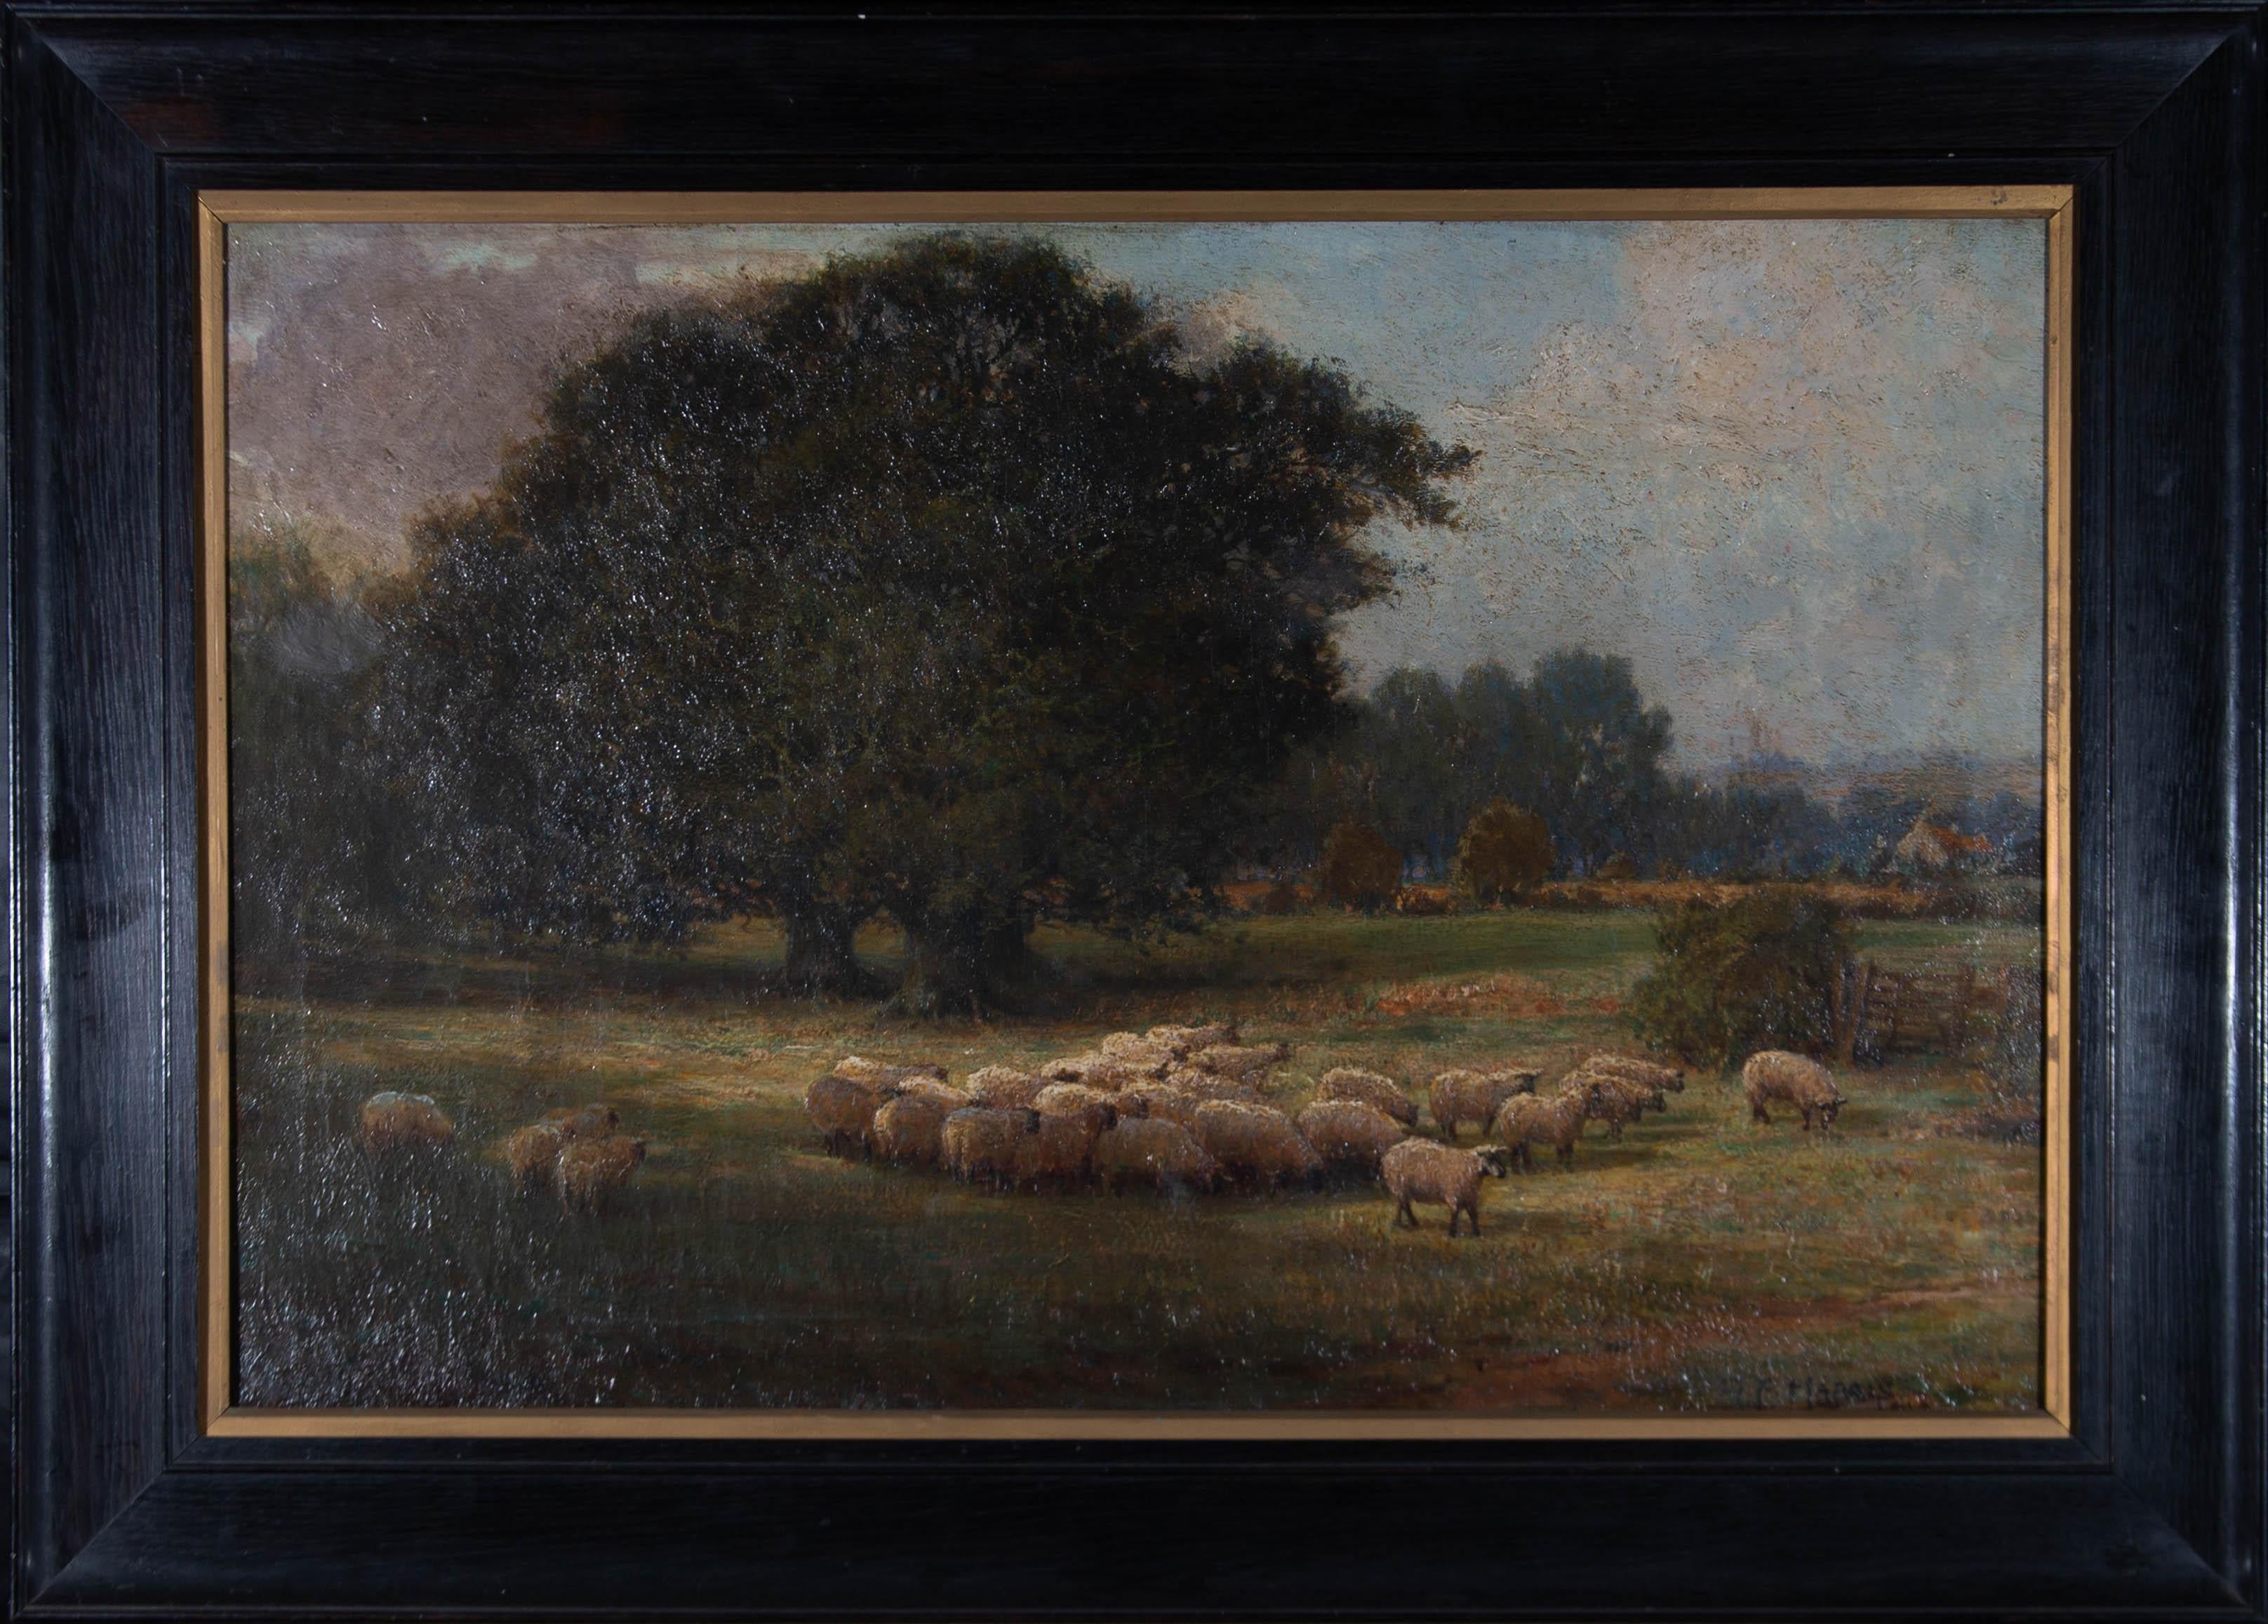 An idyllic pastoral scene depicting a flock of sheep grazing beside large oak trees. An exquisite light falls upon the delicately observed and characterful animals, while a couple of red-roofed buildings can be seen in the distance with further